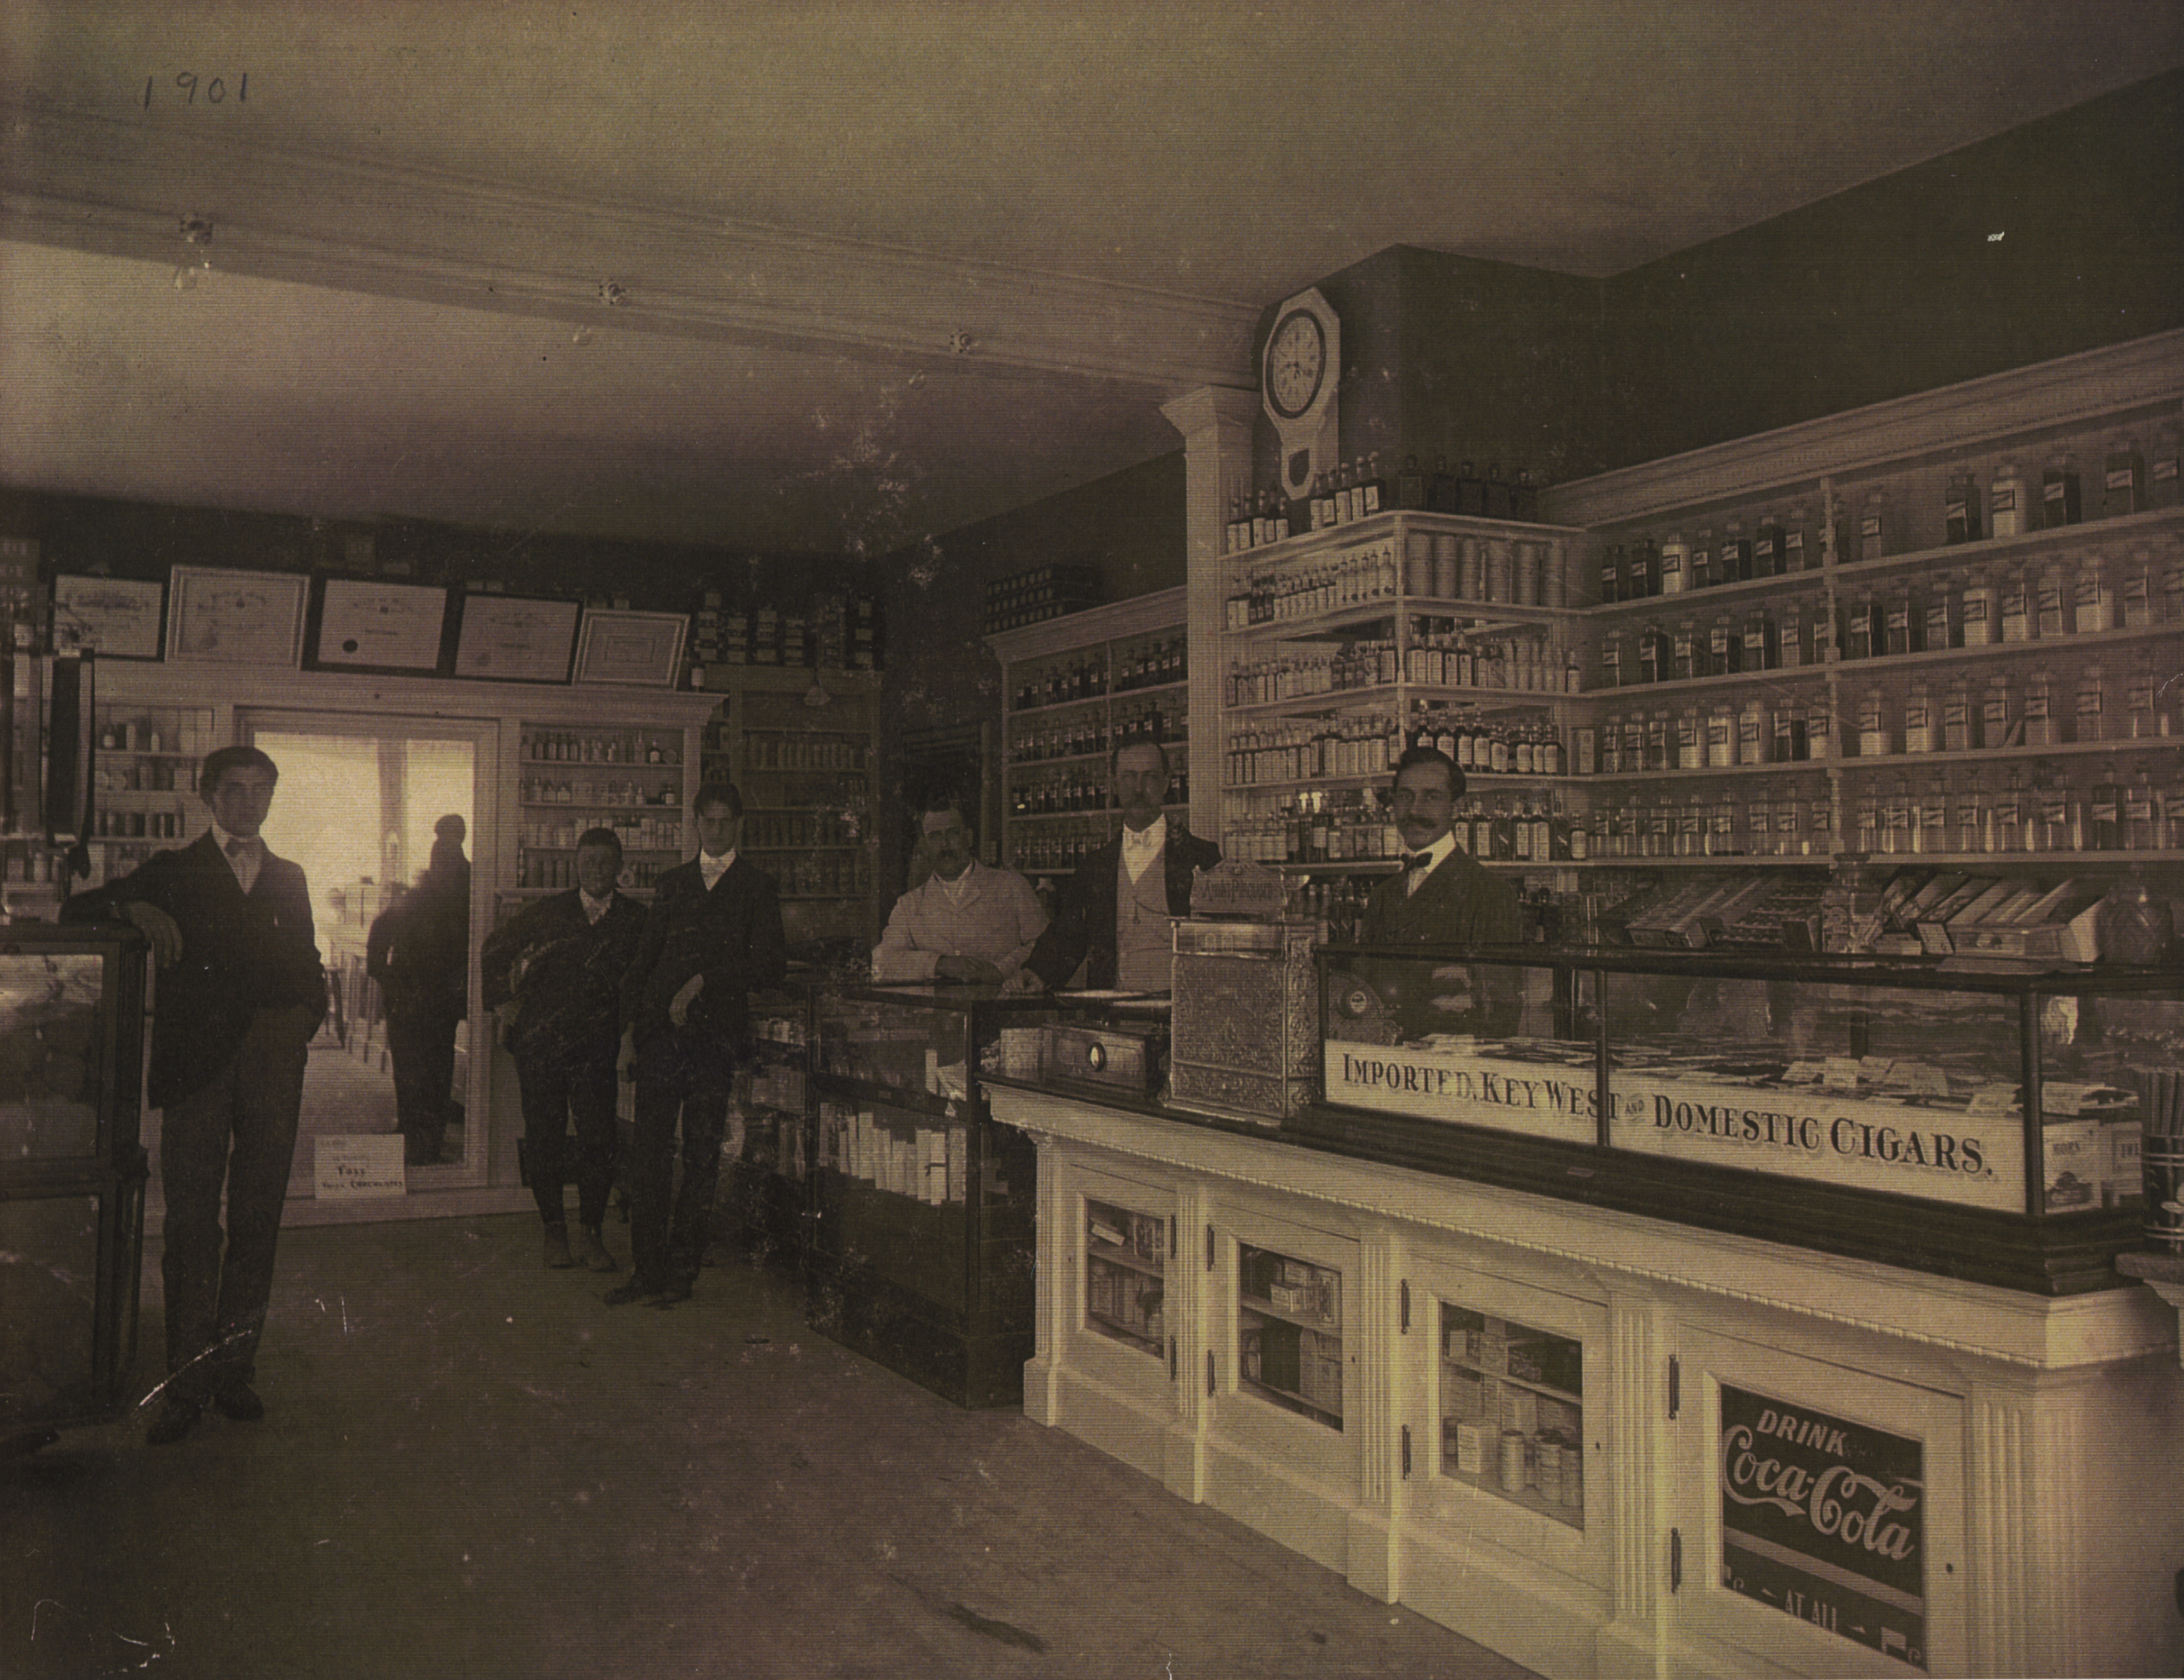 This is a sepia-toned photograph depicting the interior of Gonya's Drugstore, dated 1901. Several men are present, with attire appropriate to the era: suits, vests, and bow ties, suggesting they are either patrons or staff. One man leans casually against a glass display case at the front, which advertises "Imported & Domestic Cigars" and shows a "Drink Coca-Cola" sign. Behind the counter, two men in white aprons stand attentively, one next to a cash register. The shelves behind them are meticulously stocked with various bottles and boxes, likely containing medicinal products. Above the shelves, a prominent clock is displayed. The ceiling is high, adorned with light fixtures, and the wooden floor reflects the room's features, adding depth to the space. The photograph captures the essence of commerce and healthcare at the turn of the century, with a focus on customer service and a wide range of products.